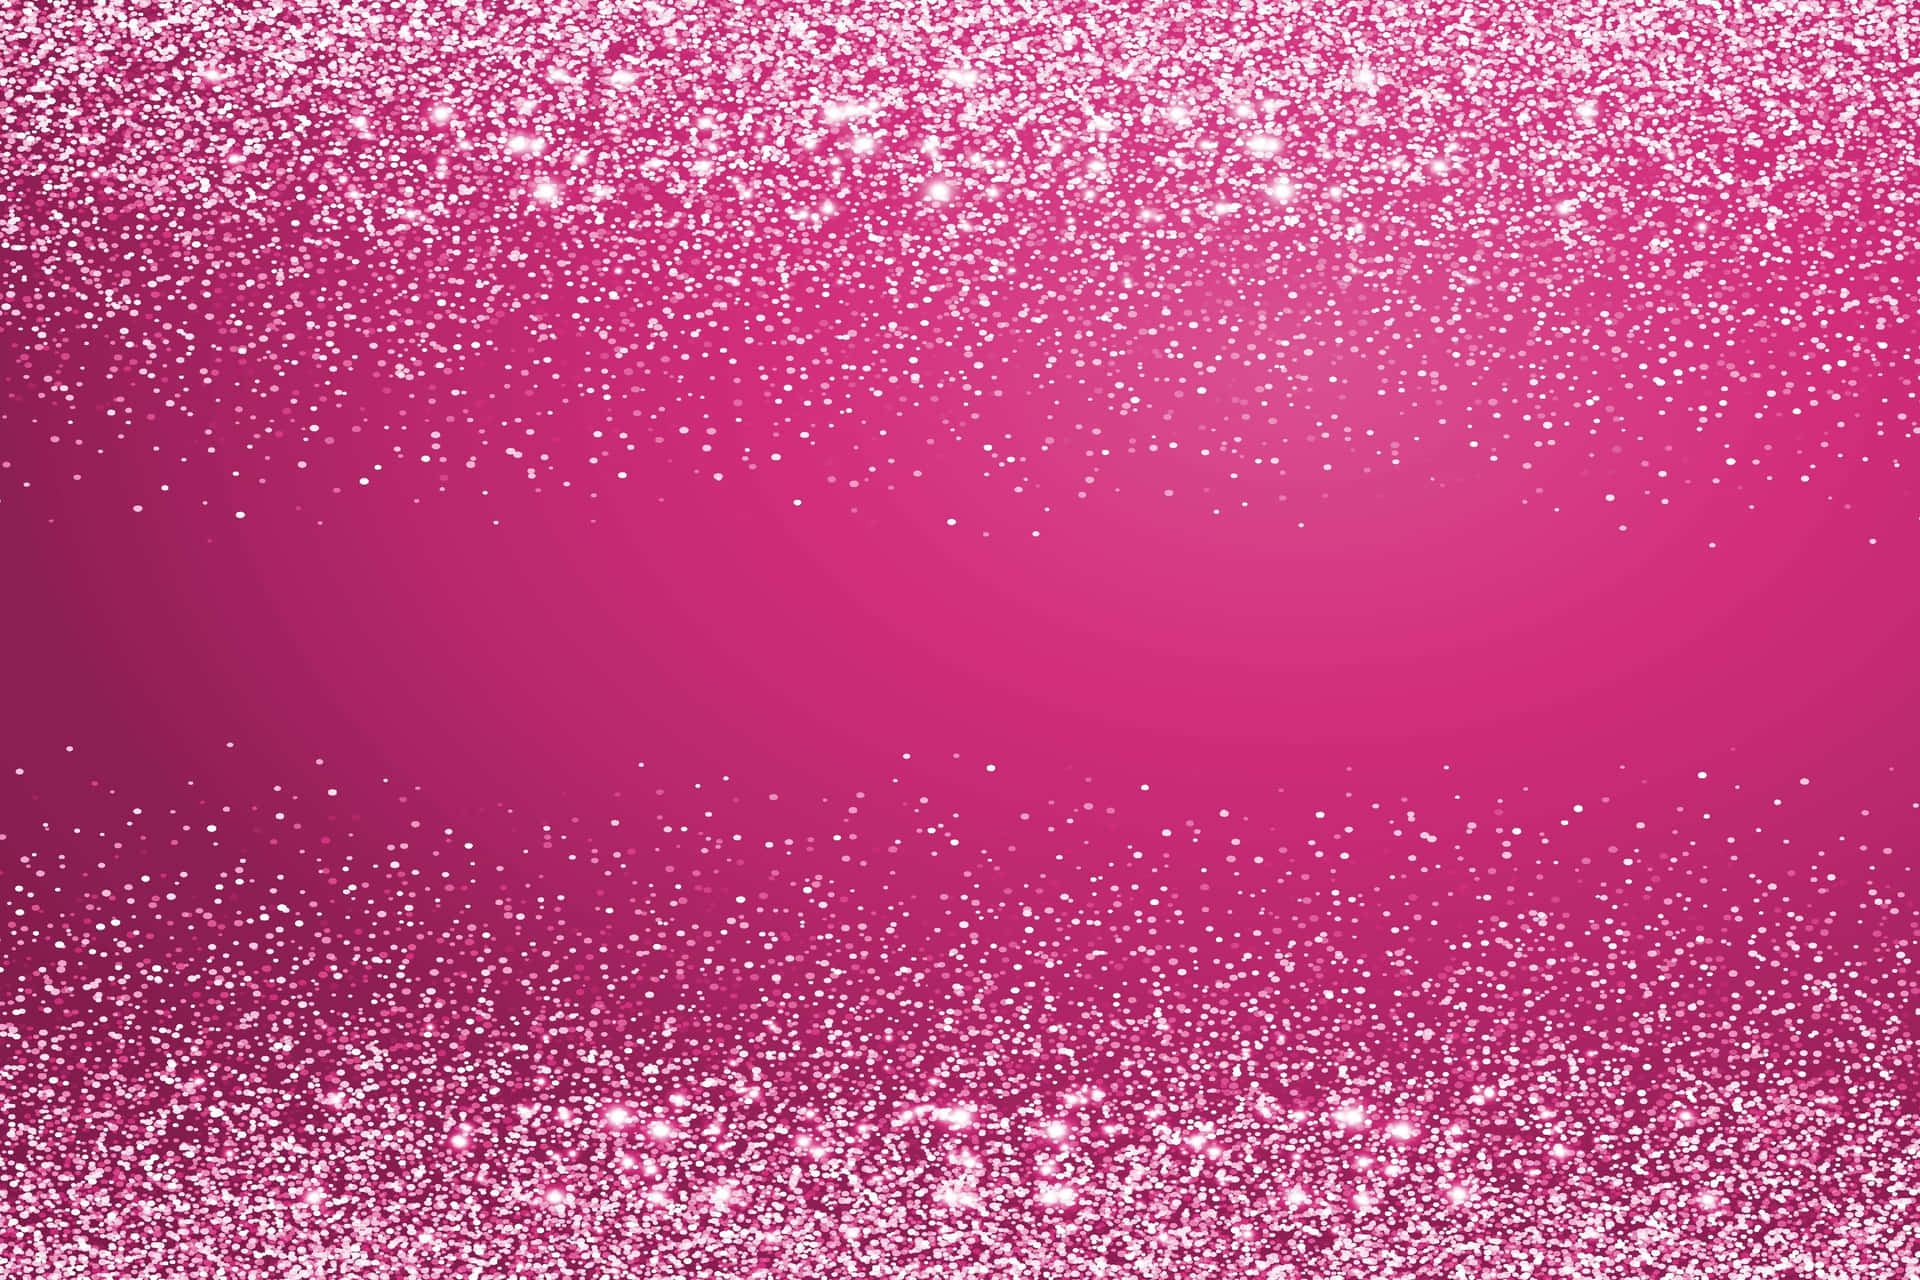 A Pink Glitter Background With White Sparkles